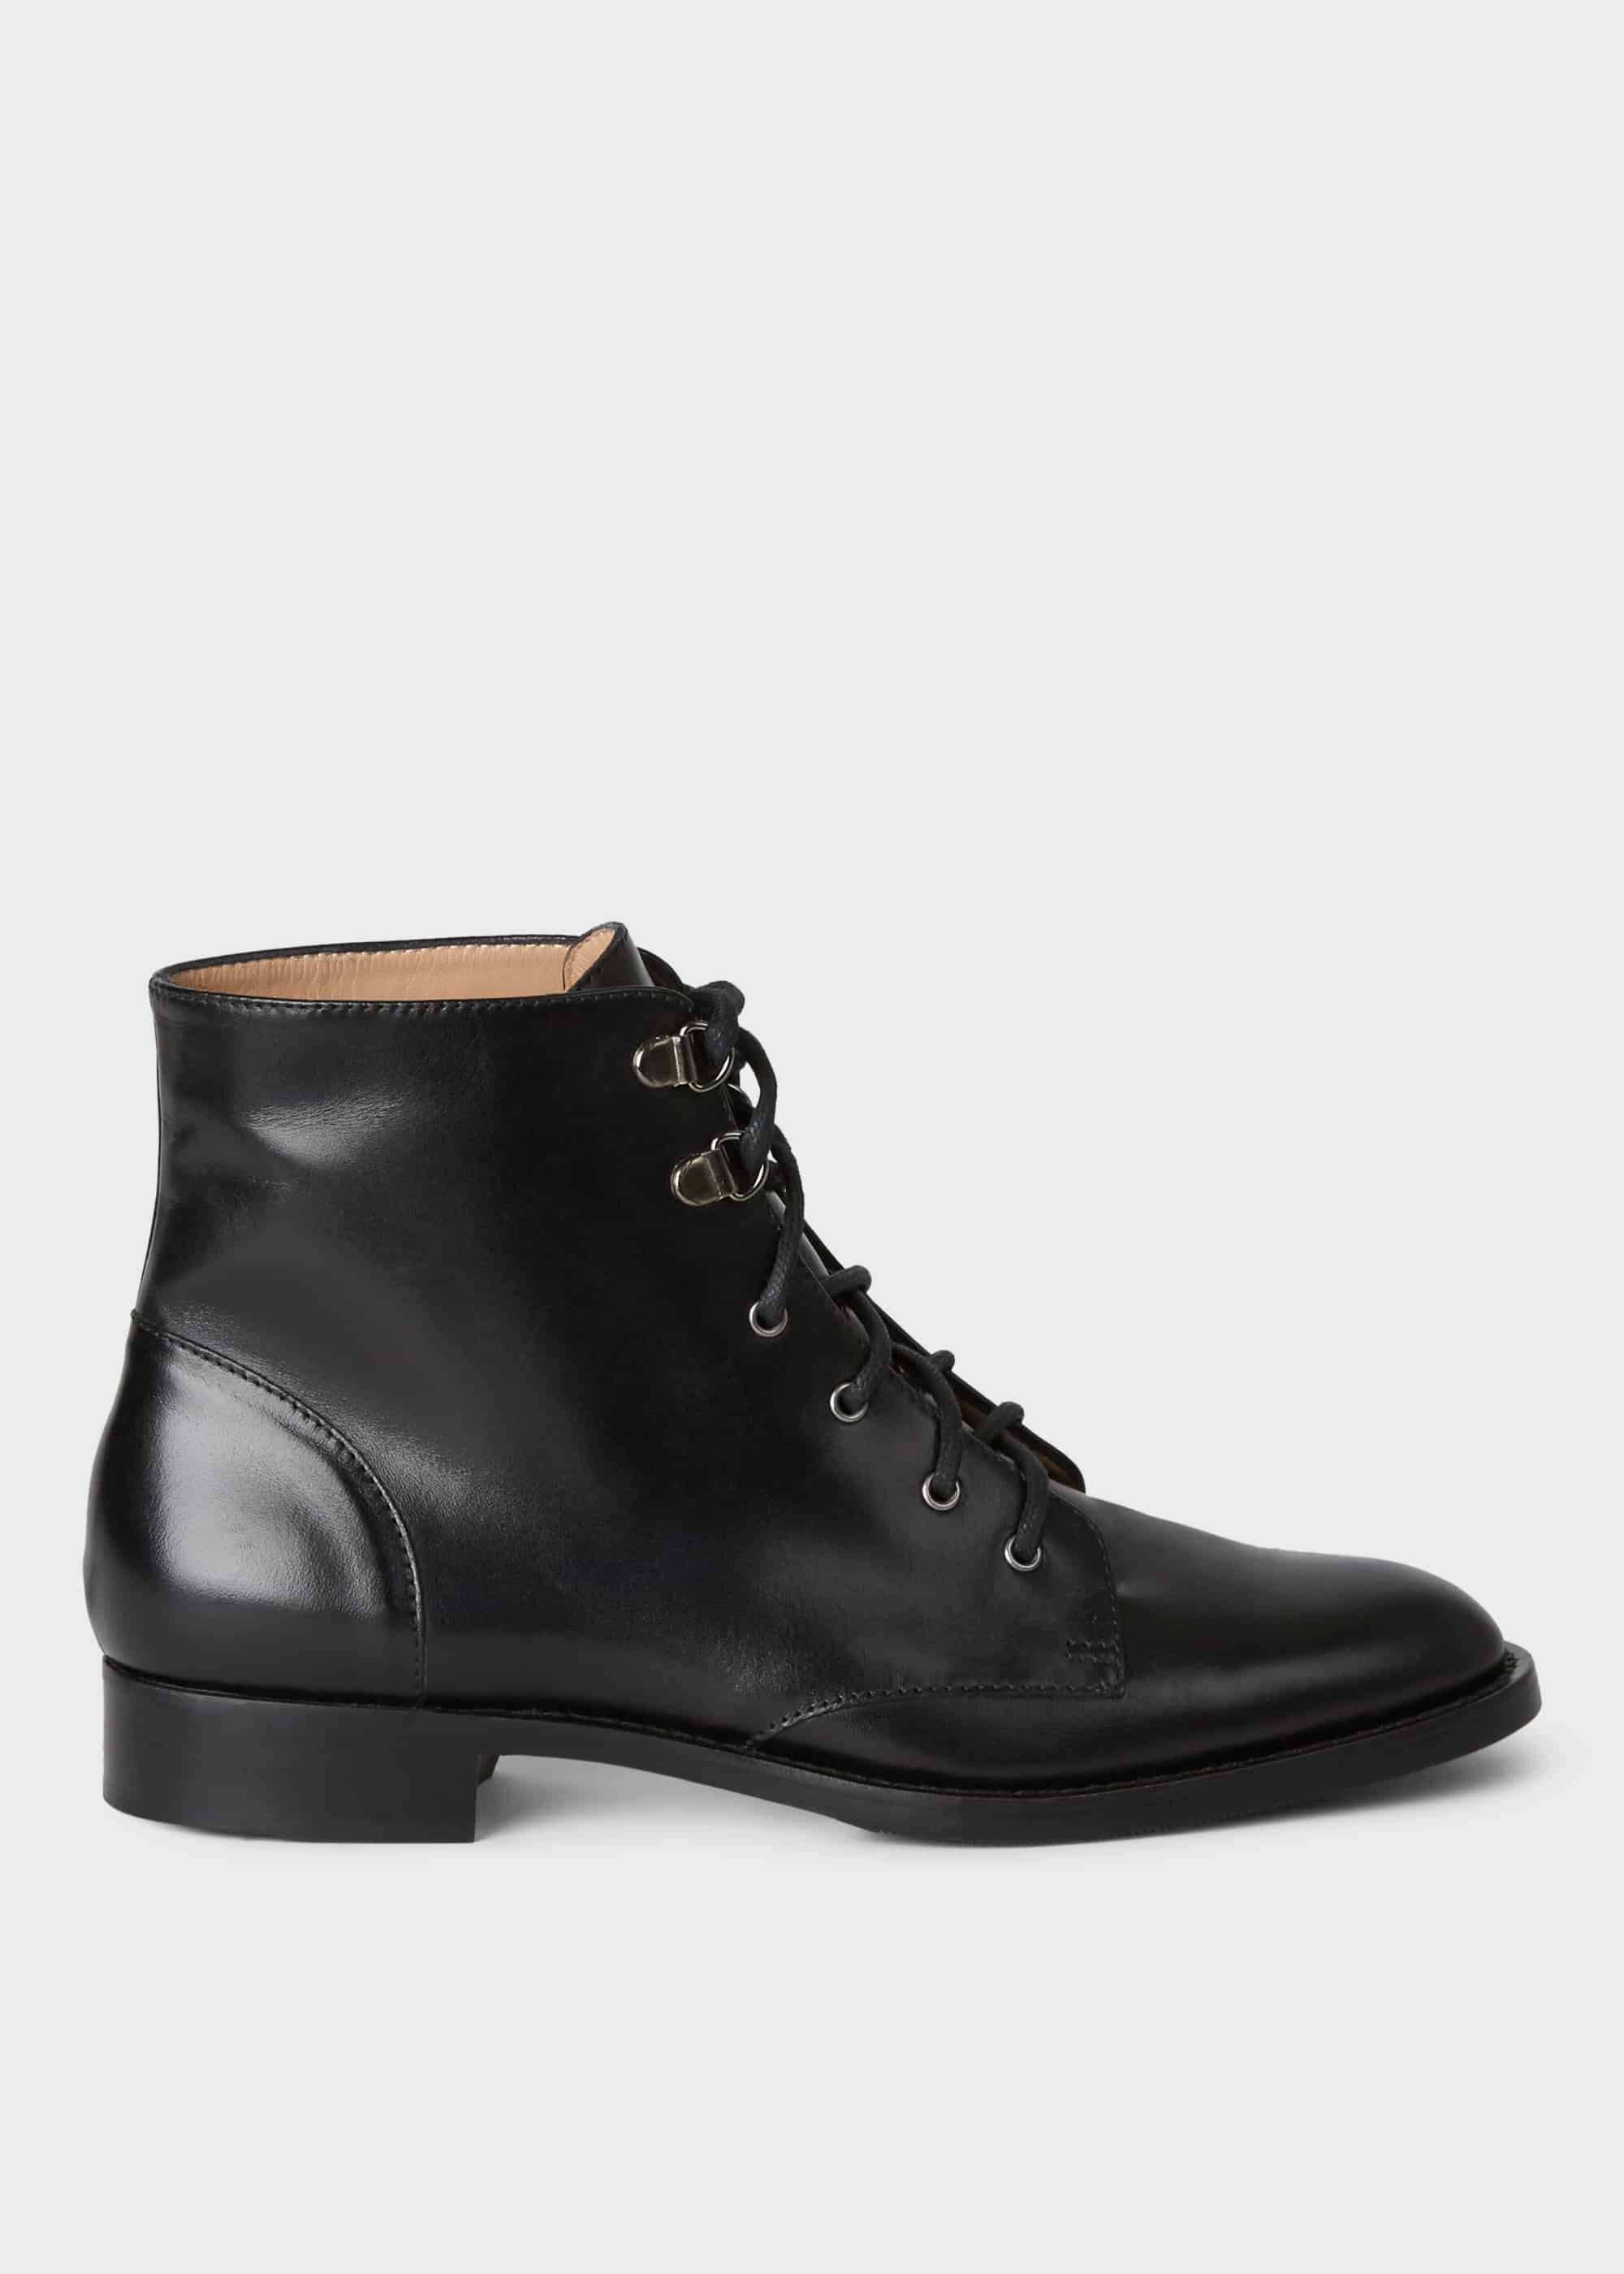 black ankle tie up boots